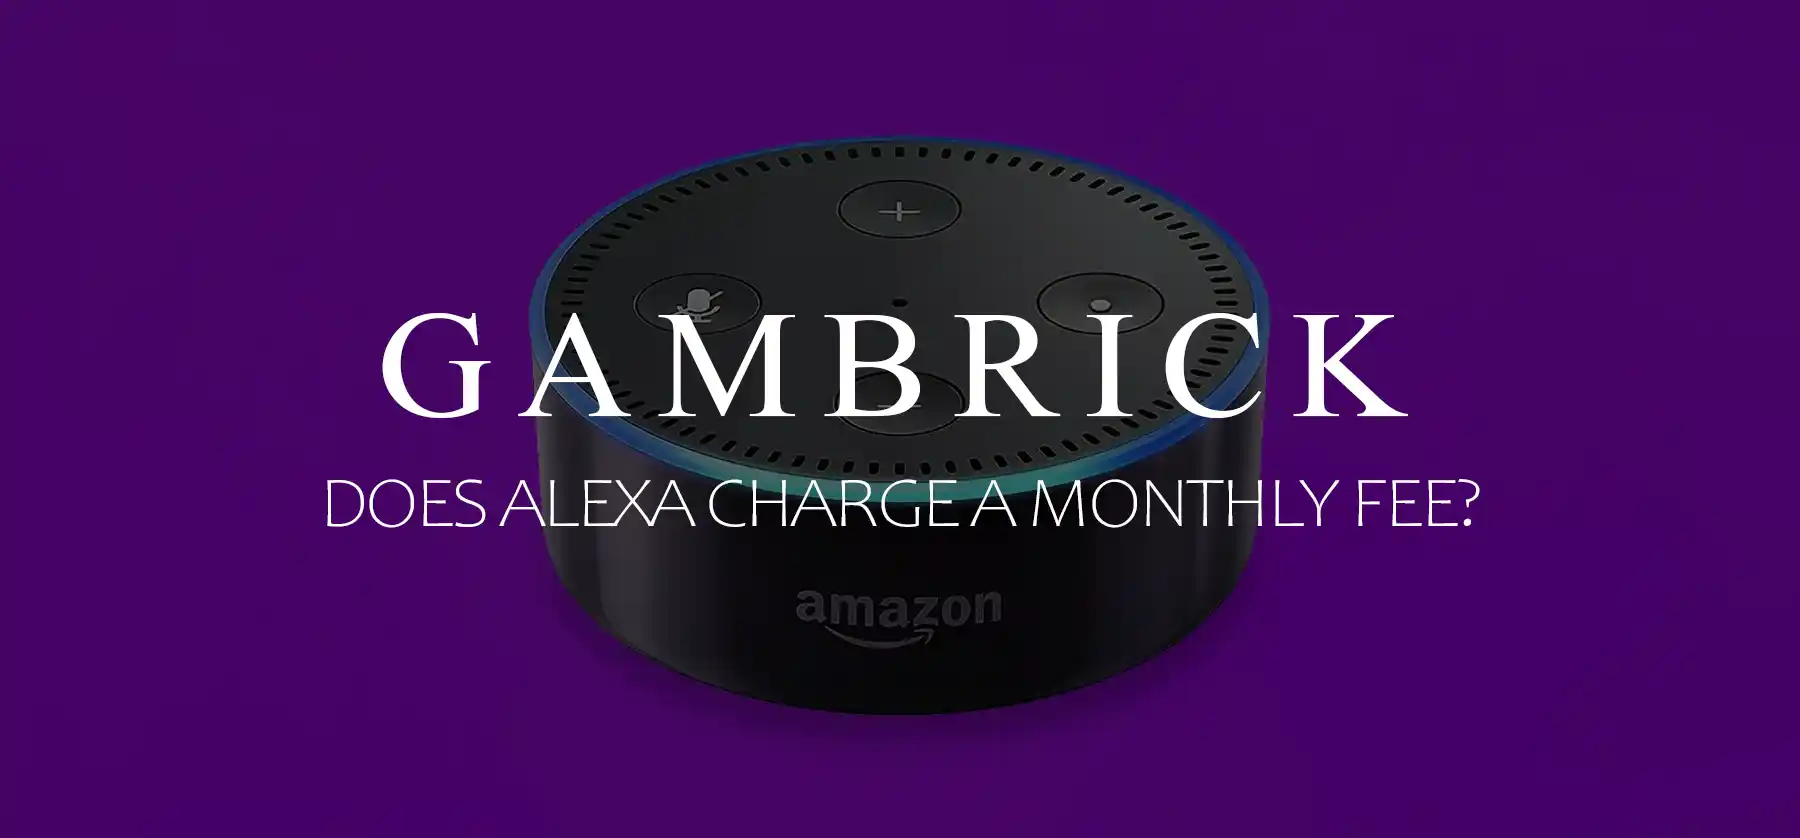 does Alexa charge a monthly fee banner 1.0